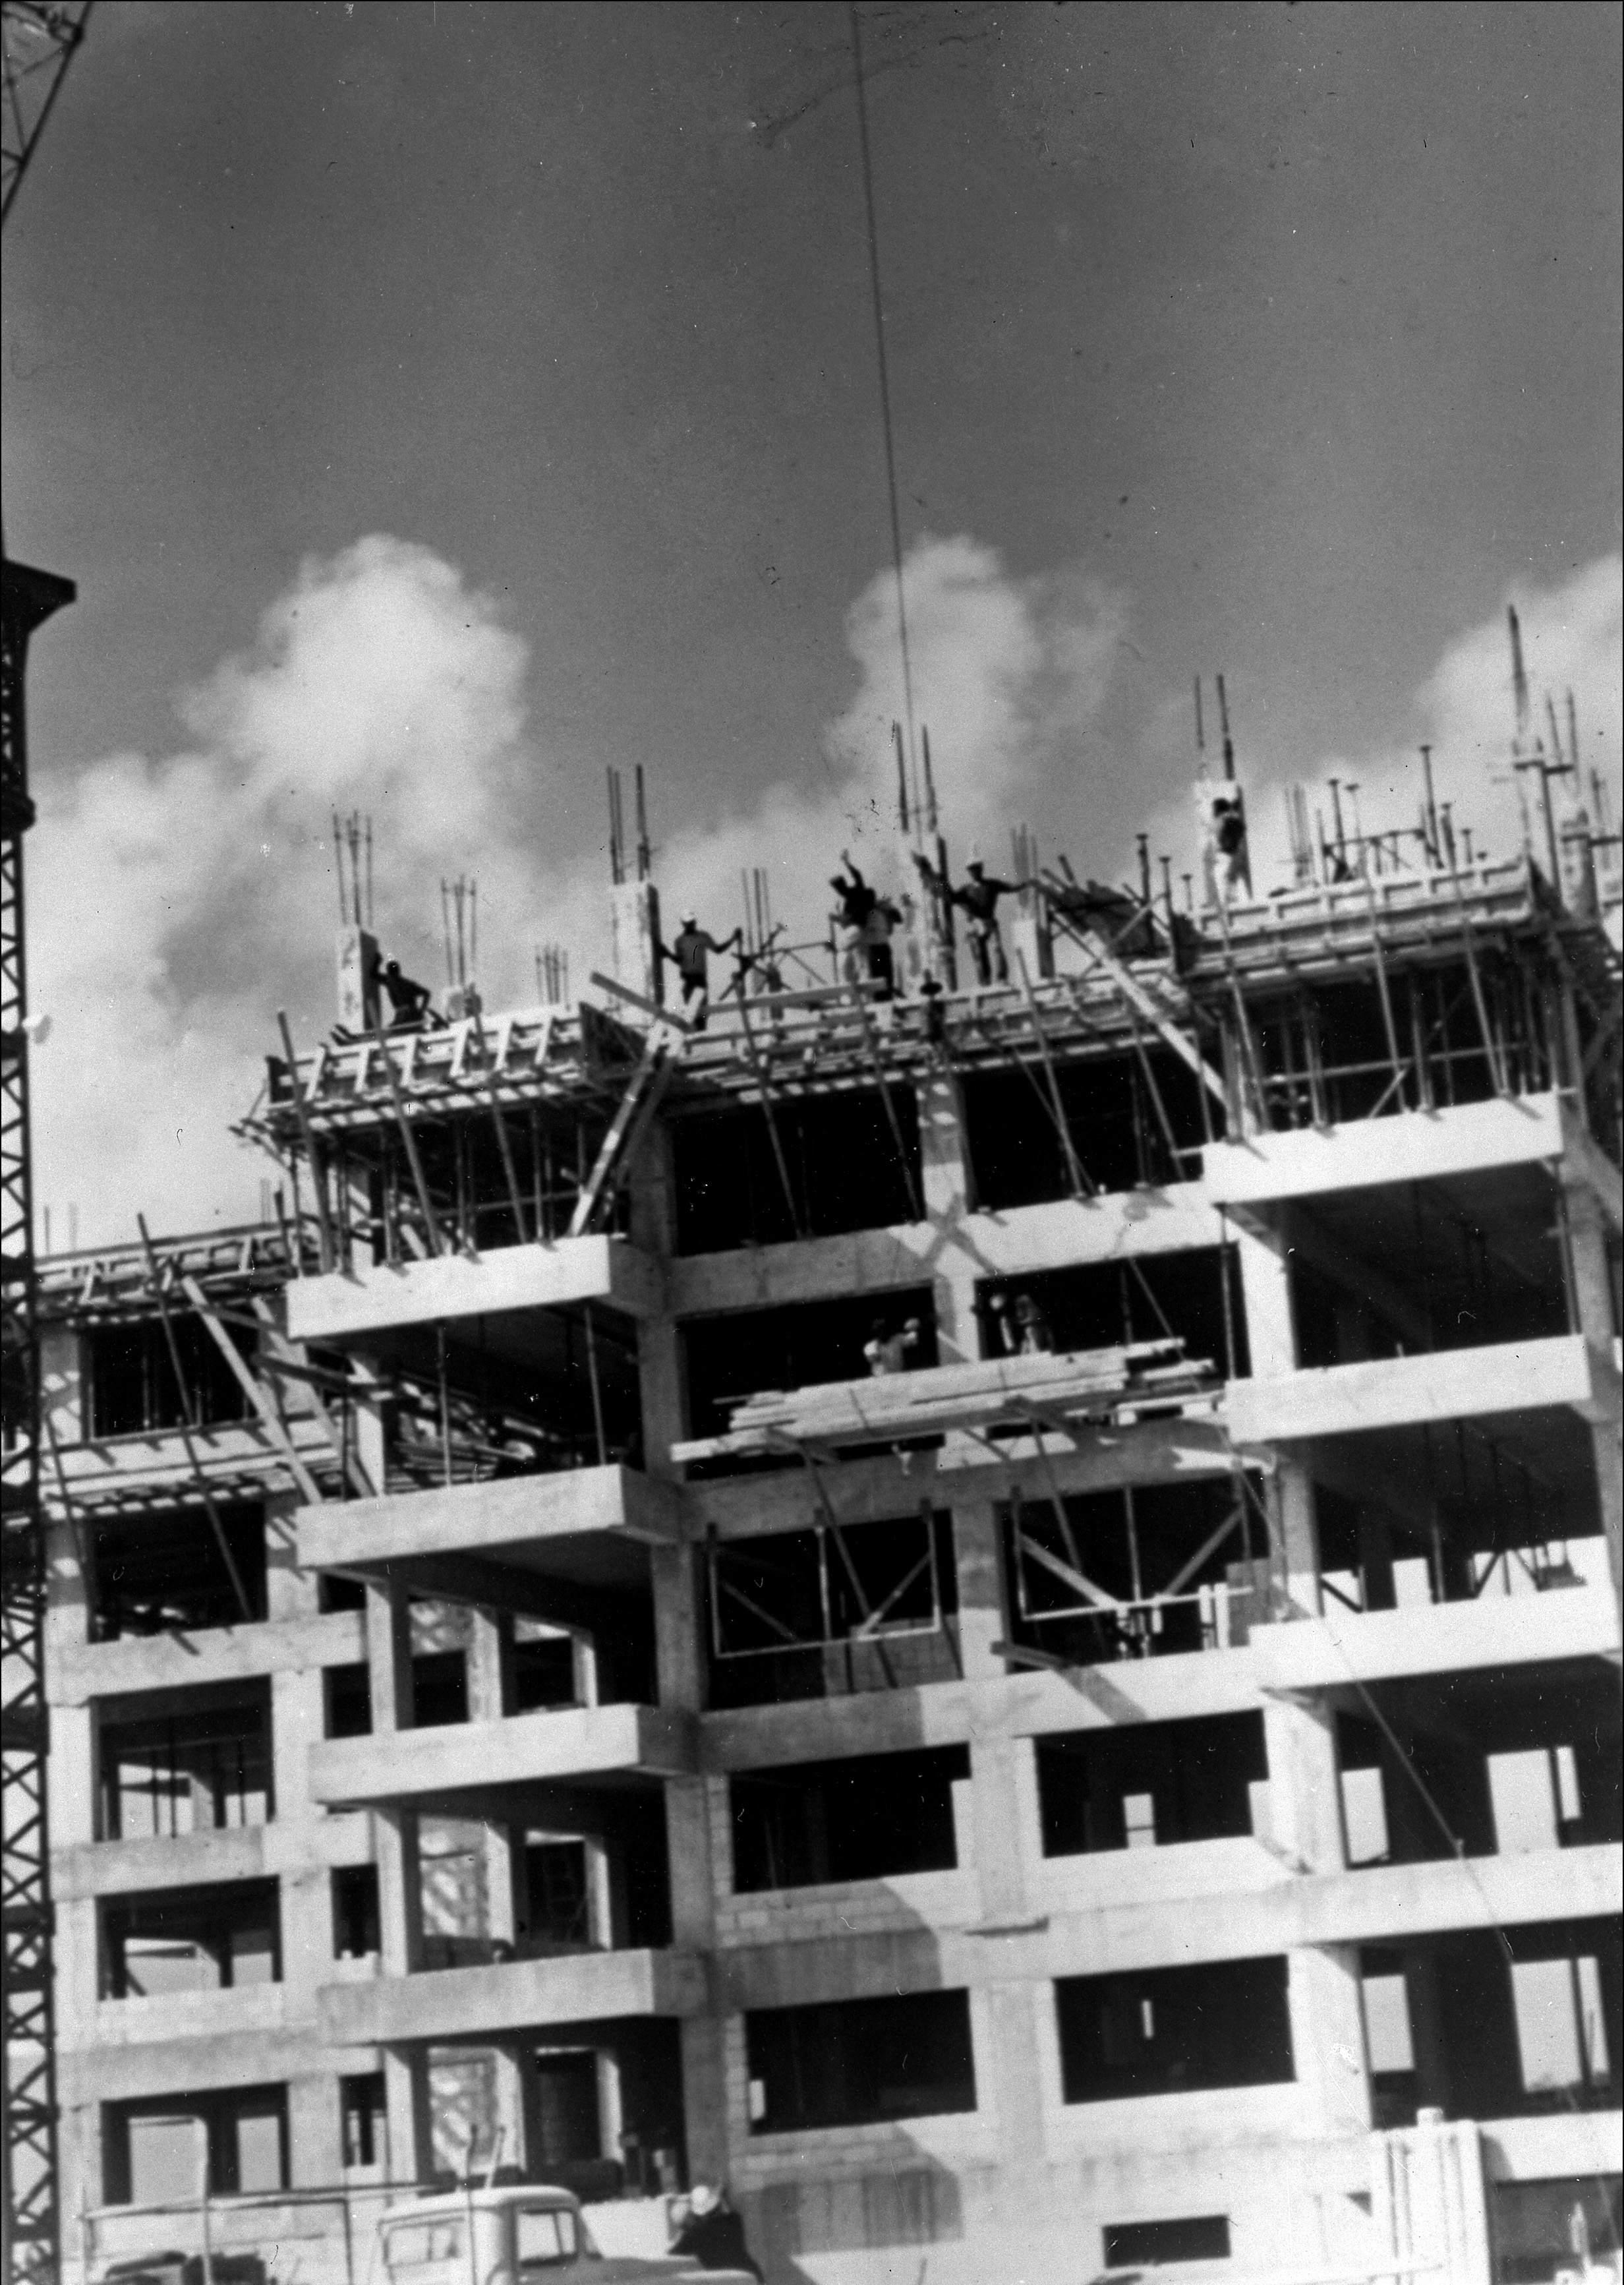 Riviera Towers under construction, 1964